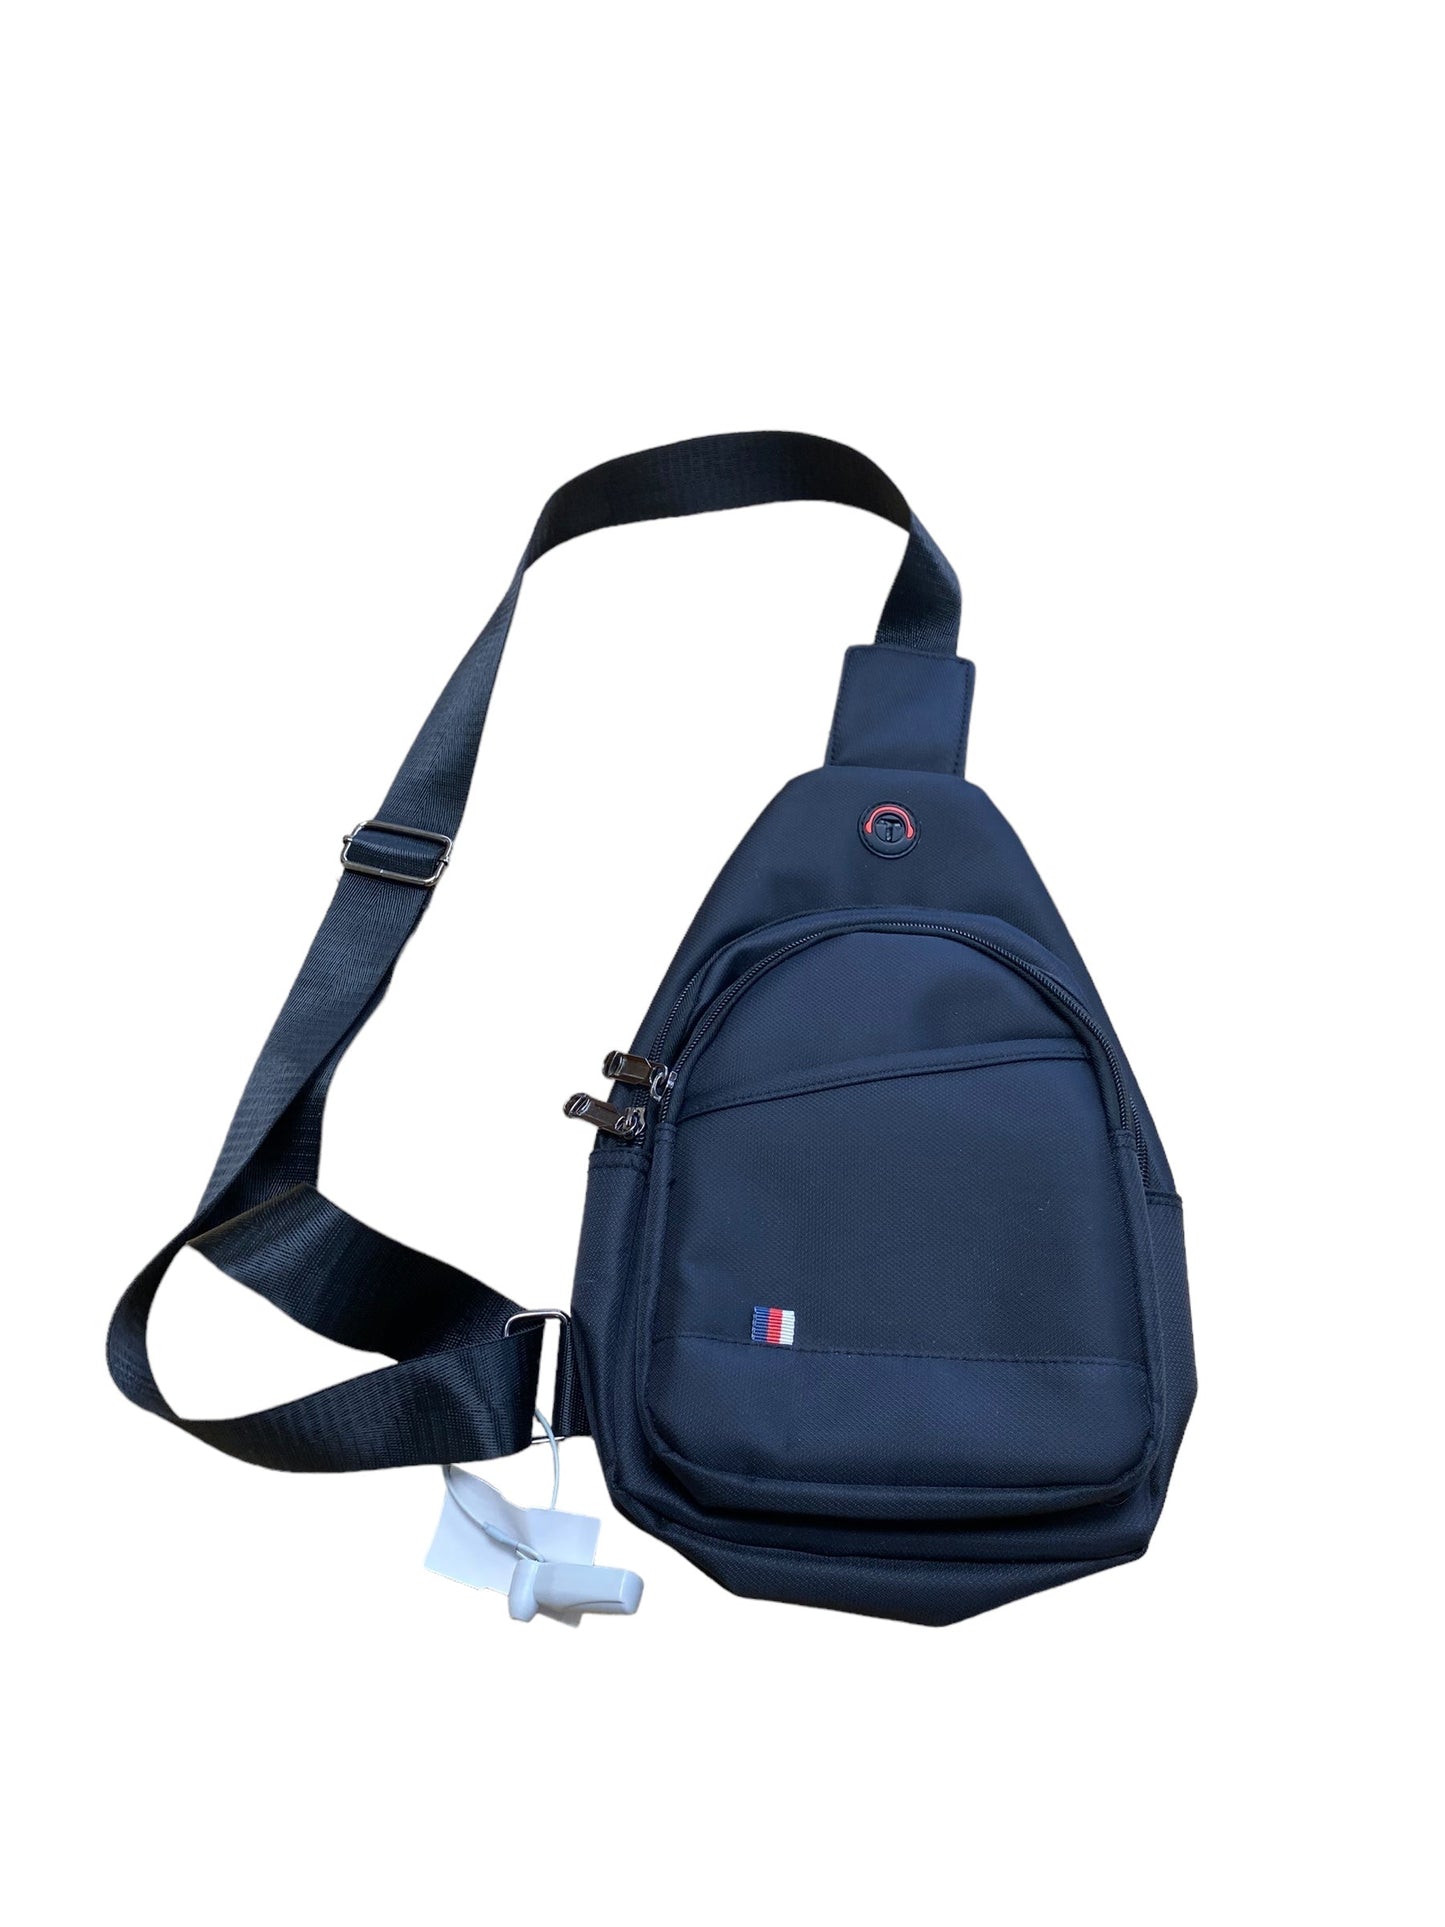 Backpack Clothes Mentor, Size Small